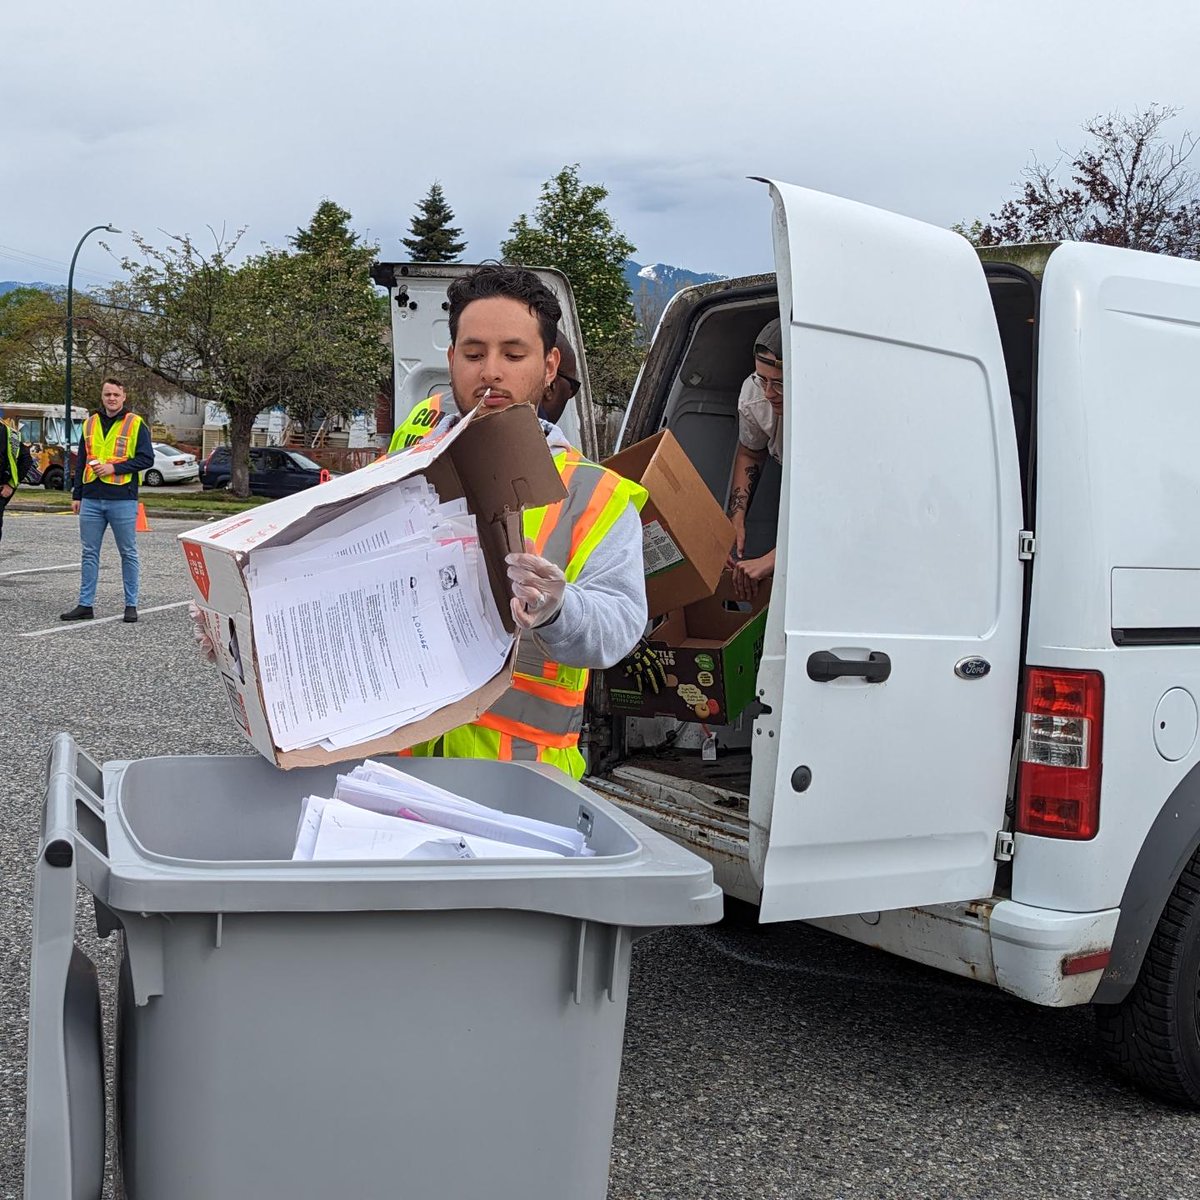 Keep them coming #Vancouver! Destroy those sensitive documents with us today at 2500 Franklin St! We'll be here until 1pm today!